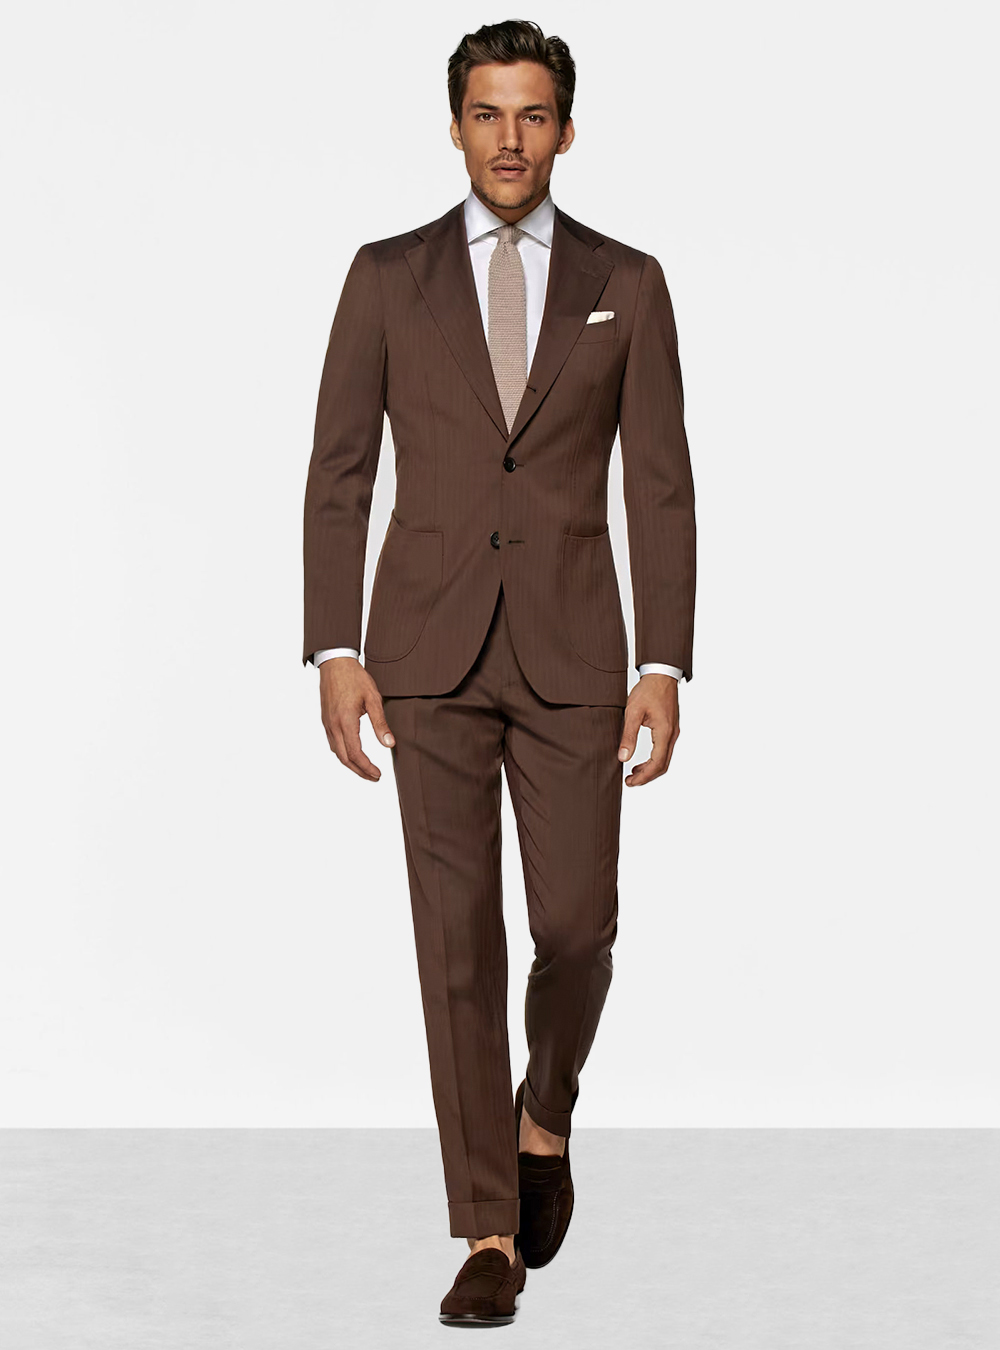 brown suit, white dress shirt, tan tie and brown loafers